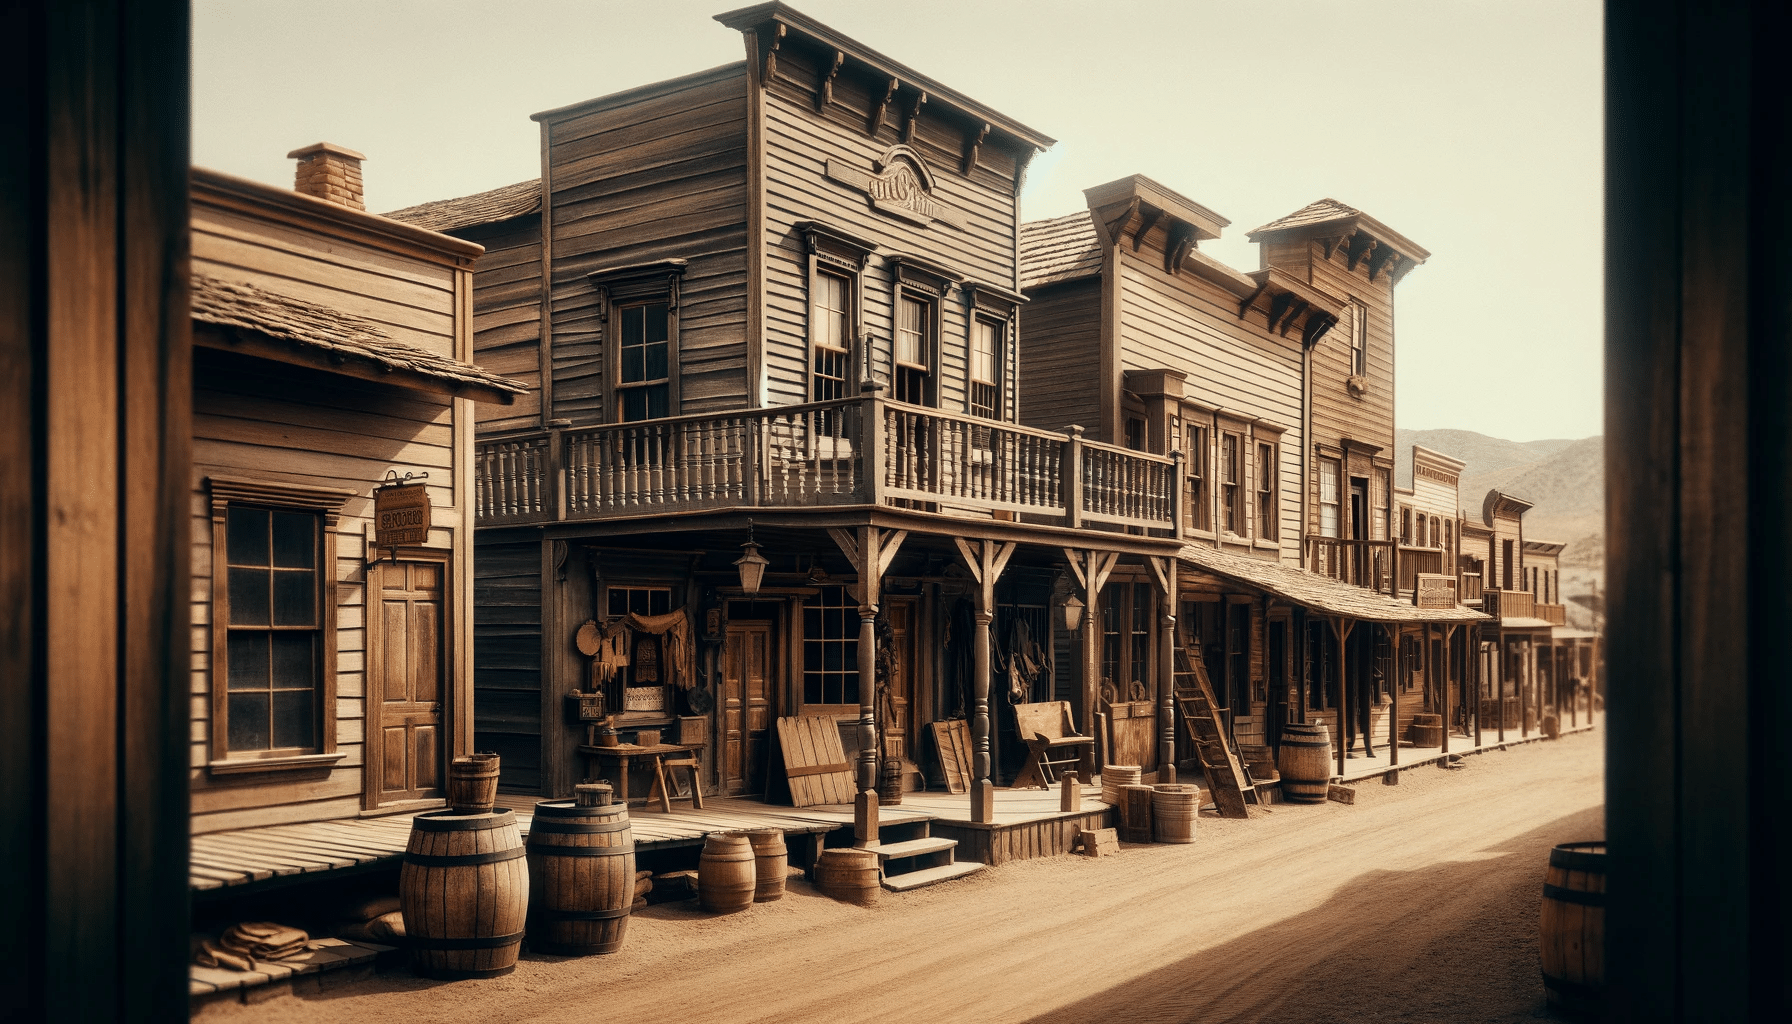 DALL·E 2024-01-22 16.35.50 - An image of an old western street, capturing the essence of the Wild West era. The street is lined with wooden buildings typical of a western town